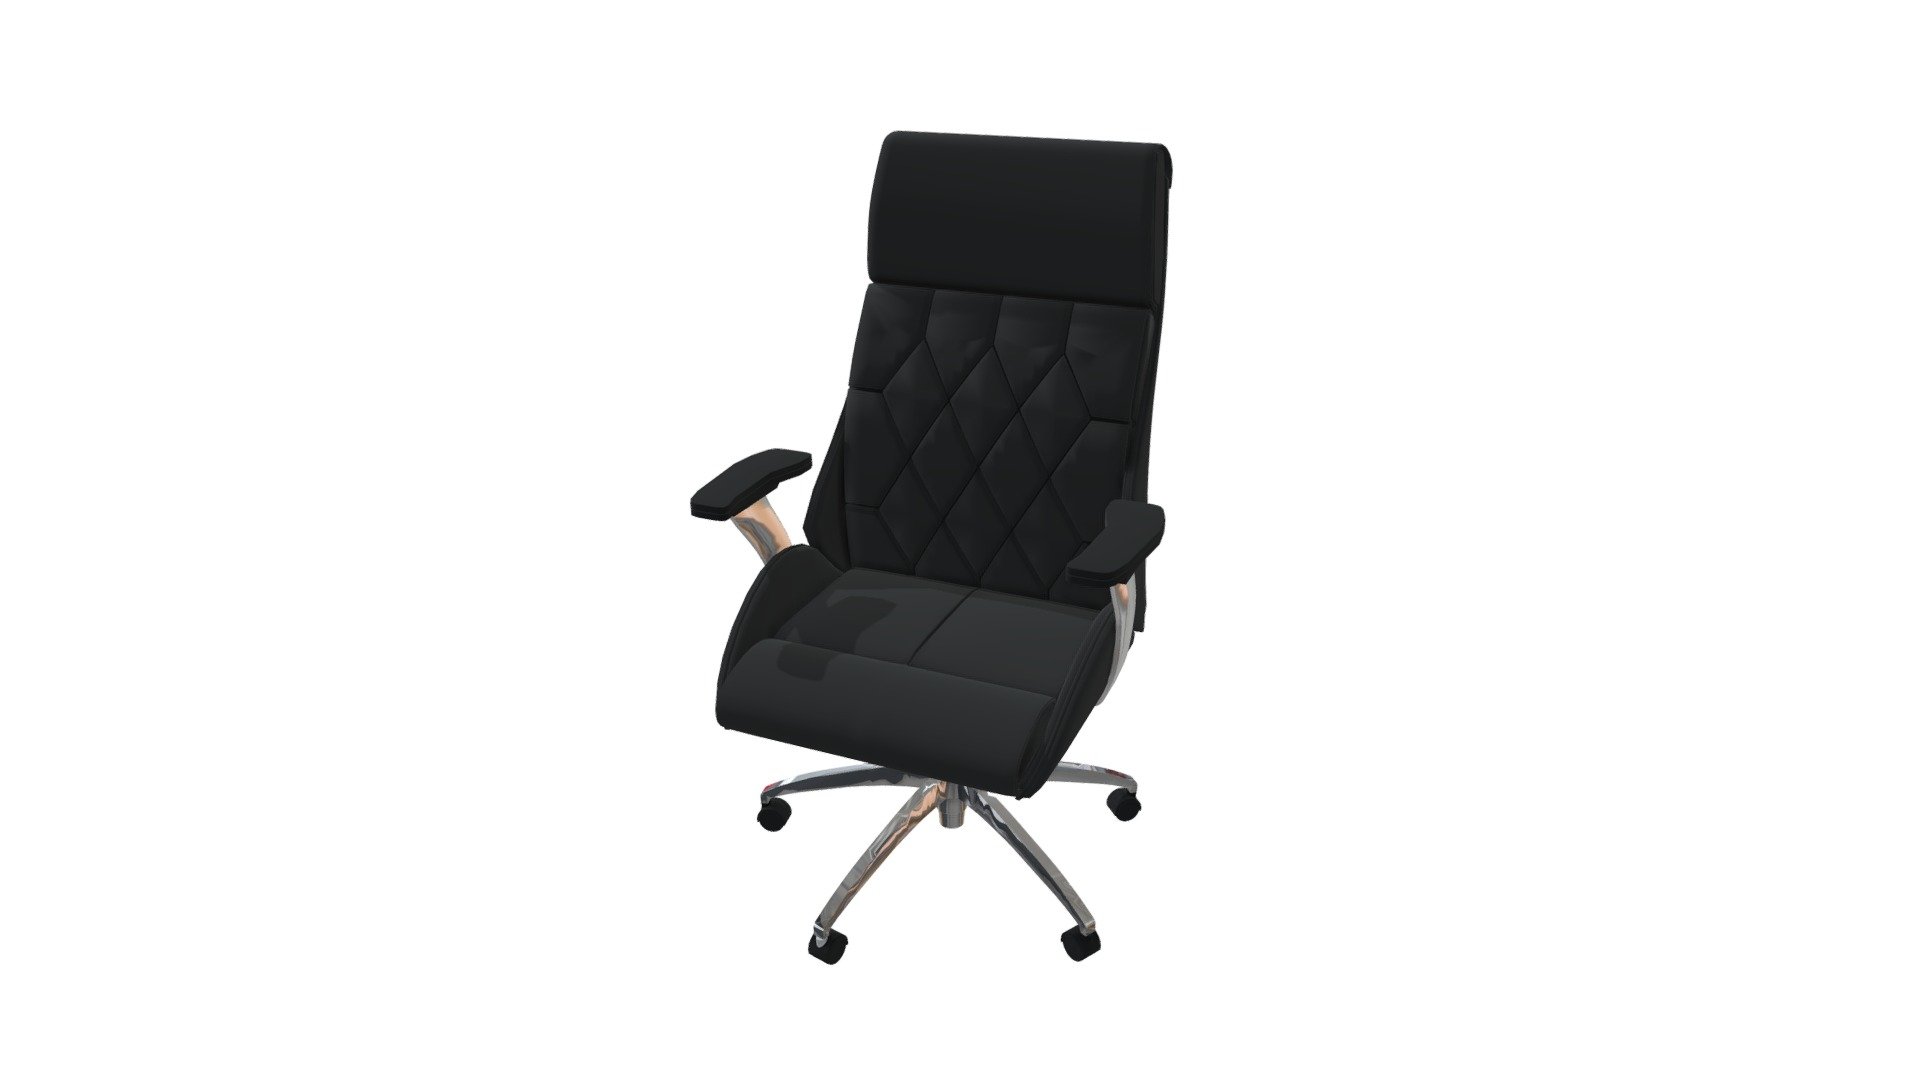 Be the leader of your desk with the Boutique Office Chair. Features leatherette wrapped seat and tufted back cushion with chrome frame. Adjustable height and tilt. www.zuomod.com/boutique-office-chair-black - Boutique Office Chair Black - 205890 - Buy Royalty Free 3D model by Zuo Modern (@zuo) 3d model